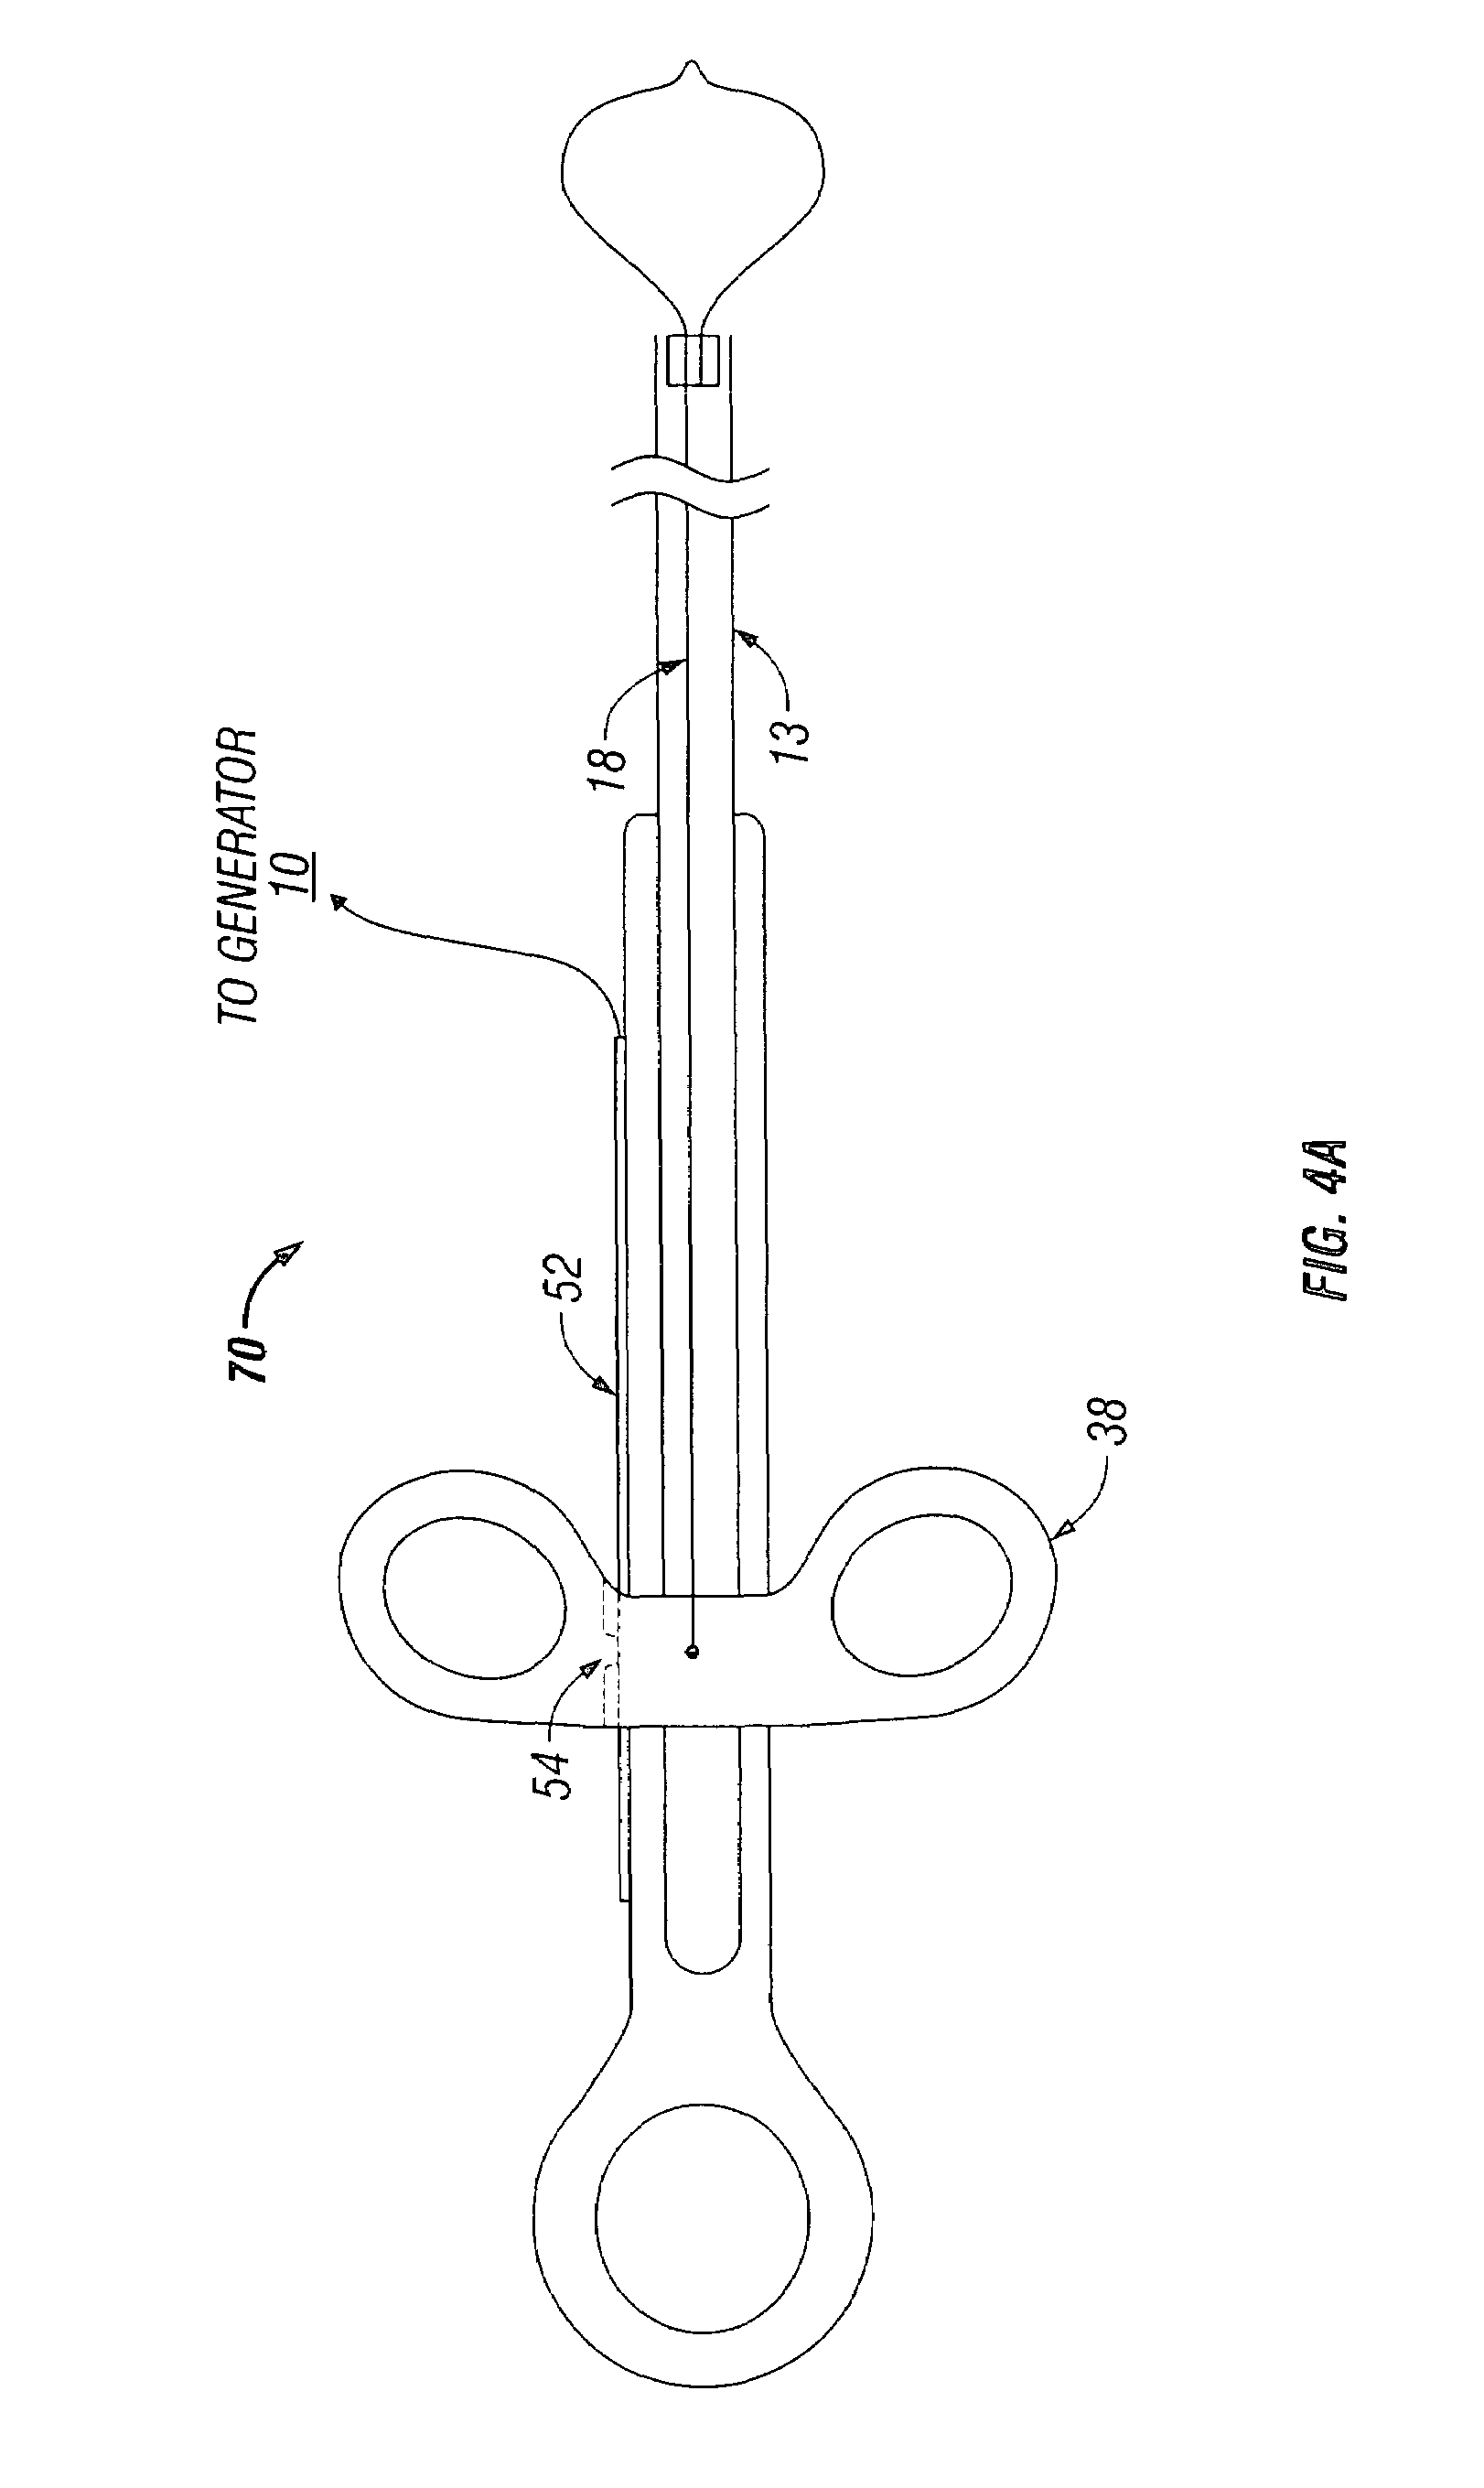 System and method for controlling electrosurgical snares